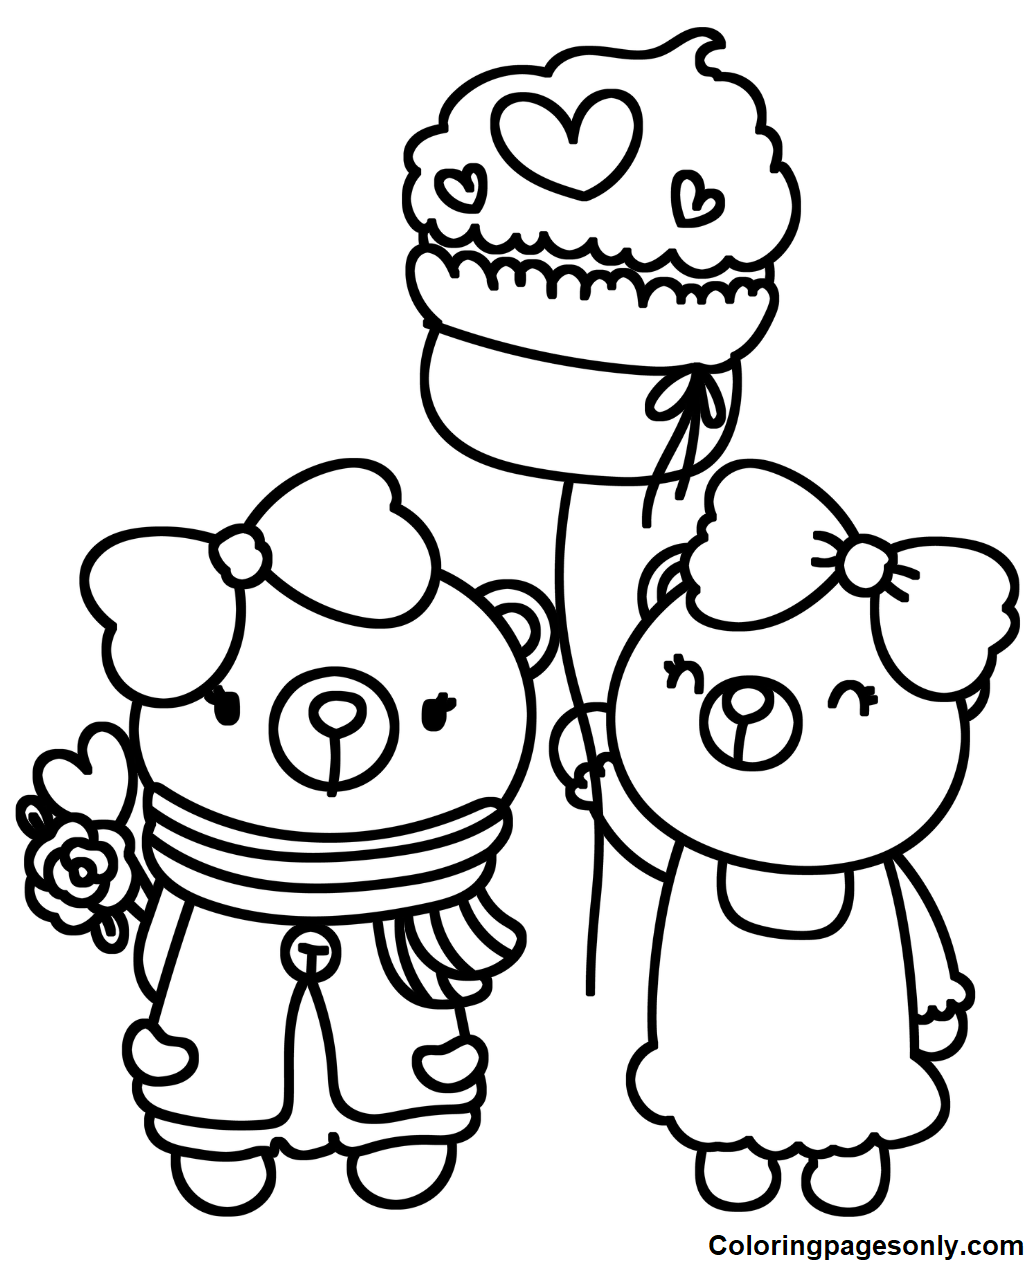 Two Bear in Valentine’s Day Coloring Pages